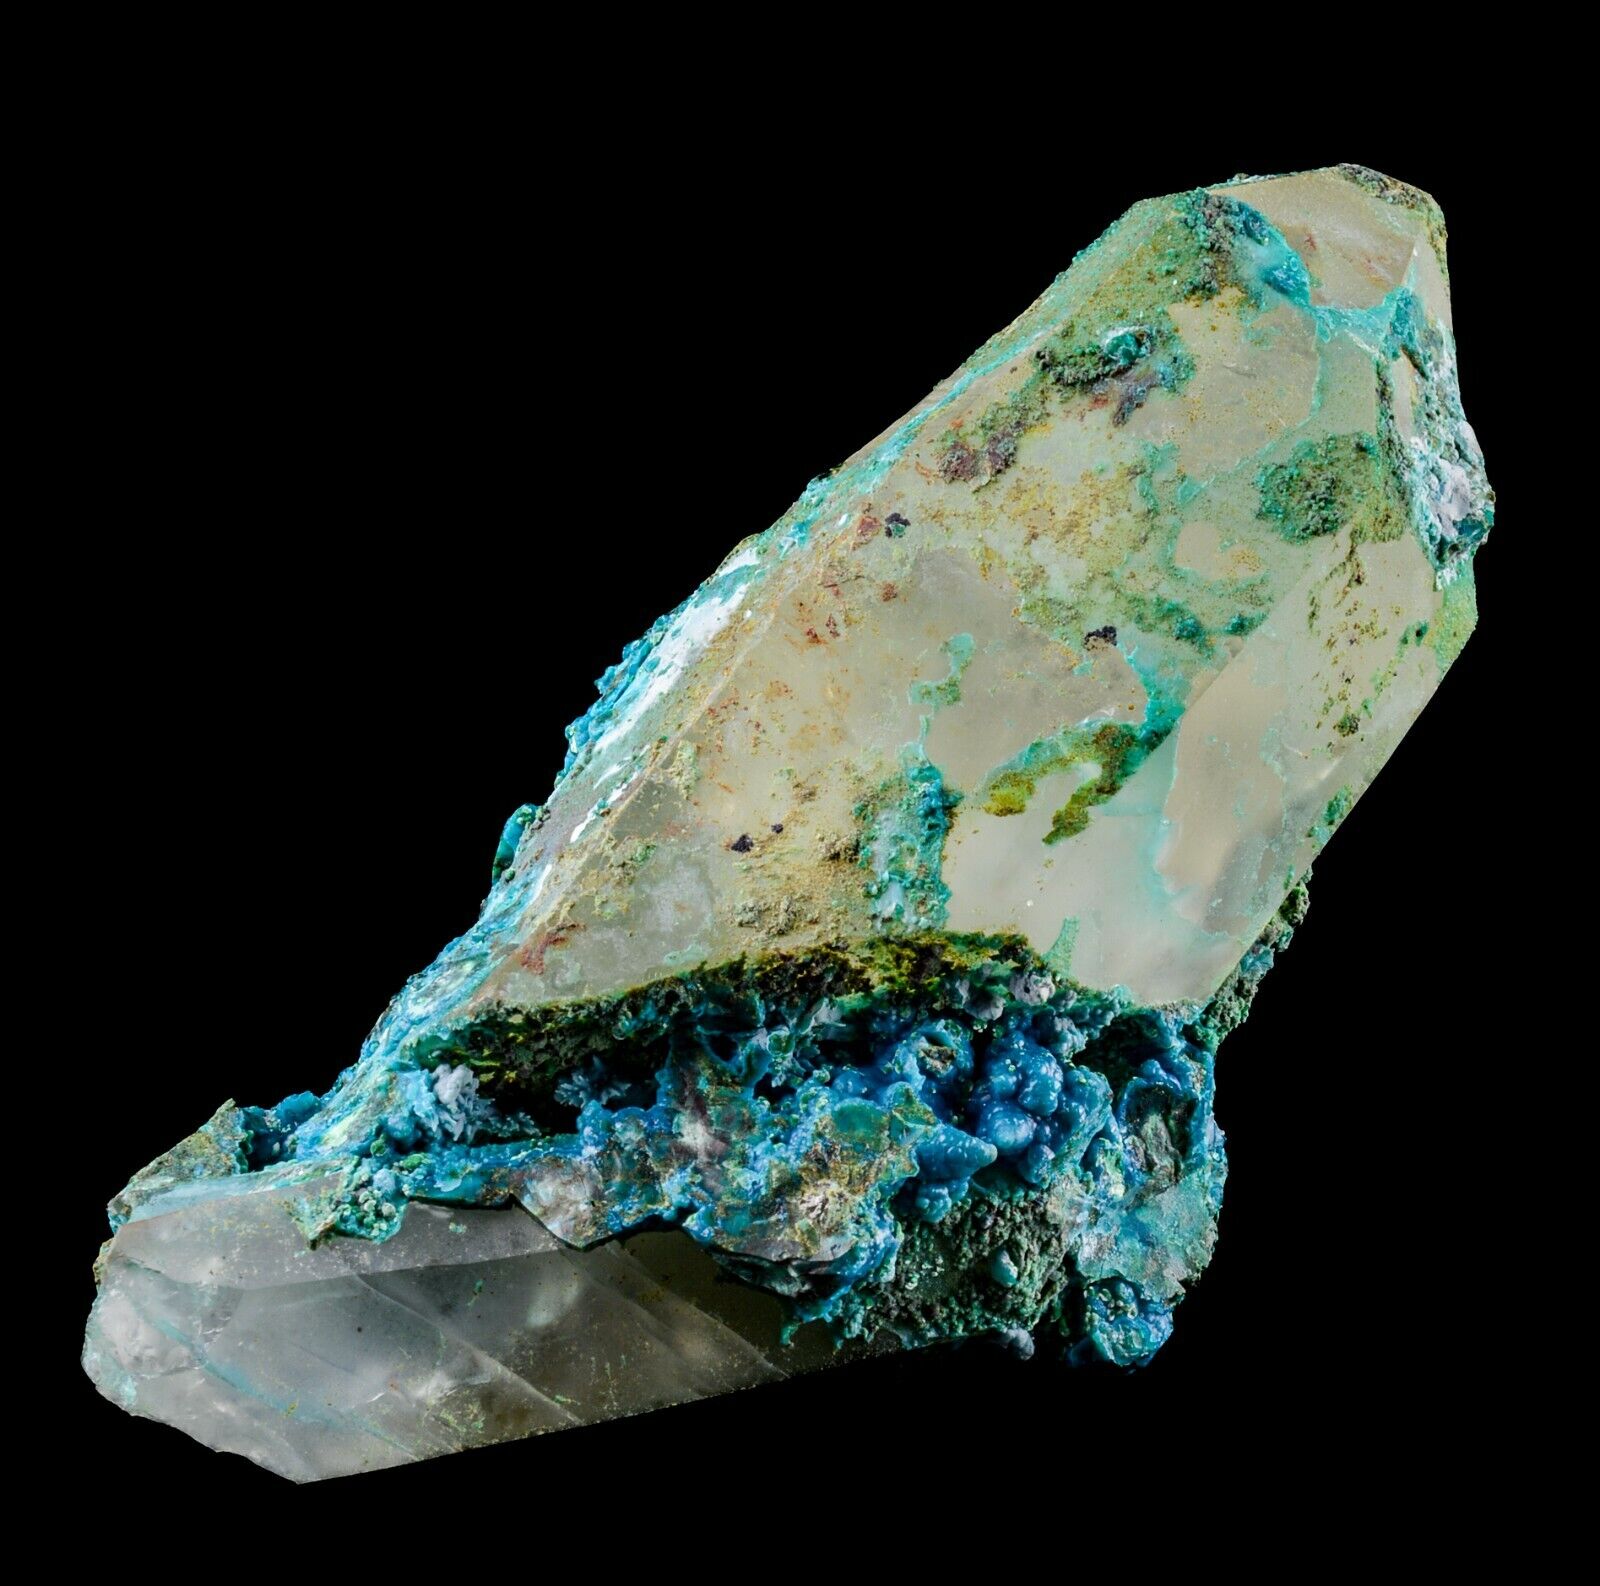 Minerals - New - Extremely Rare Association By Quartz With Chrysocolla - Peru